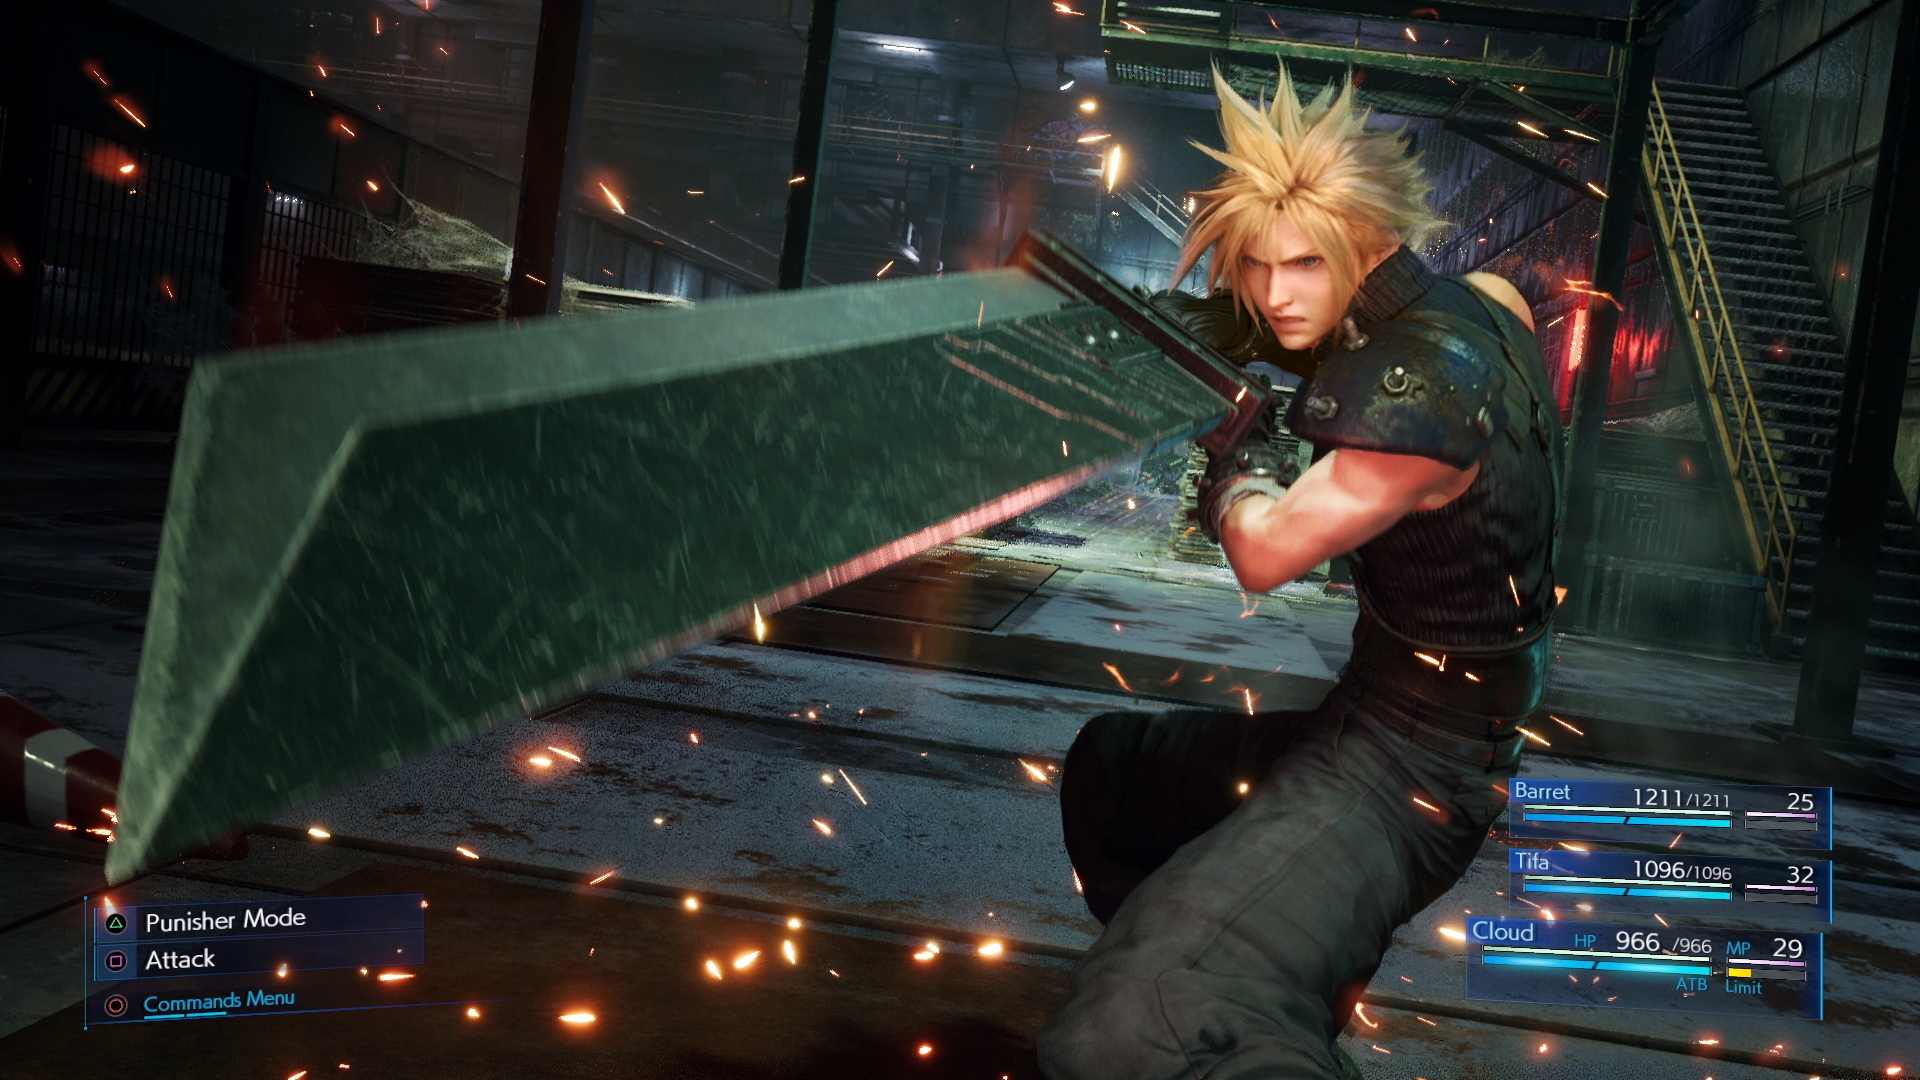 Tips for playing FINAL FANTASY VII REMAKE